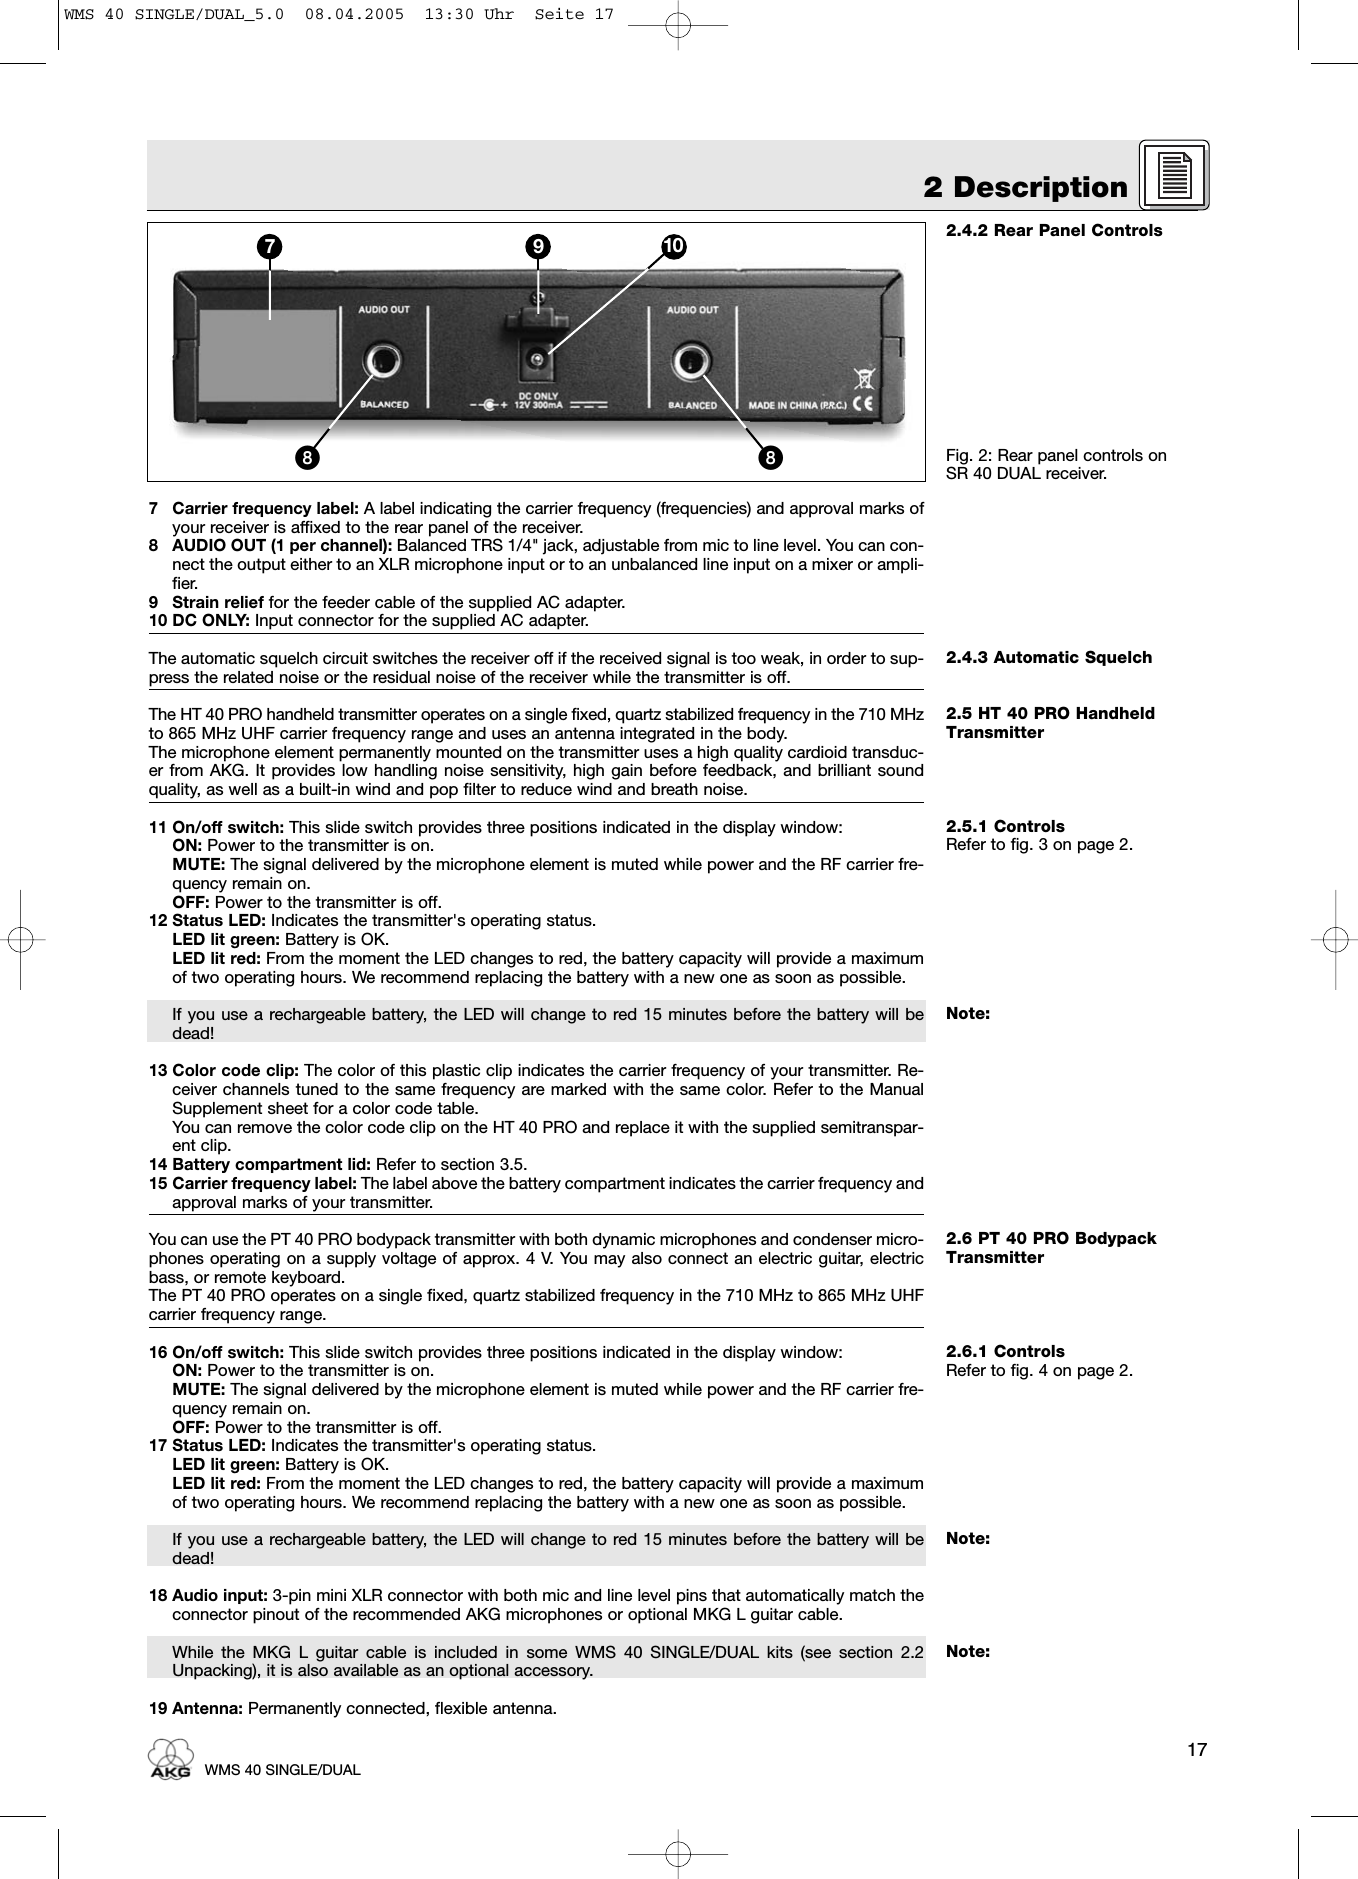 2.4.2 Rear Panel ControlsFig. 2: Rear panel controls on SR 40 DUAL receiver.2.4.3 Automatic Squelch2.5 HT 40 PRO HandheldTransmitter2.5.1 ControlsRefer to fig. 3 on page 2.Note:2.6 PT 40 PRO BodypackTransmitter2.6.1 ControlsRefer to fig. 4 on page 2.Note:Note:7 Carrier frequency label: A label indicating the carrier frequency (frequencies) and approval marks ofyour receiver is affixed to the rear panel of the receiver.8 AUDIO OUT (1 per channel): Balanced TRS 1/4&quot; jack, adjustable from mic to line level. You can con-nect the output either to an XLR microphone input or to an unbalanced line input on a mixer or ampli-fier.9 Strain relief for the feeder cable of the supplied AC adapter.10 DC ONLY: Input connector for the supplied AC adapter.The automatic squelch circuit switches the receiver off if the received signal is too weak, in order to sup-press the related noise or the residual noise of the receiver while the transmitter is off.The HT 40 PRO handheld transmitter operates on a single fixed, quartz stabilized frequency in the 710 MHzto 865 MHz UHF carrier frequency range and uses an antenna integrated in the body.The microphone element permanently mounted on the transmitter uses a high quality cardioid transduc-er from AKG. It provides low handling noise sensitivity, high gain before feedback, and brilliant soundquality, as well as a built-in wind and pop filter to reduce wind and breath noise.11 On/off switch: This slide switch provides three positions indicated in the display window:ON: Power to the transmitter is on.MUTE: The signal delivered by the microphone element is muted while power and the RF carrier fre-quency remain on.OFF: Power to the transmitter is off.12 Status LED: Indicates the transmitter&apos;s operating status.LED lit green: Battery is OK.LED lit red: From the moment the LED changes to red, the battery capacity will provide a maximumof two operating hours. We recommend replacing the battery with a new one as soon as possible.If you use a rechargeable battery, the LED will change to red 15 minutes before the battery will bedead!13 Color code clip: The color of this plastic clip indicates the carrier frequency of your transmitter. Re-ceiver channels tuned to the same frequency are marked with the same color. Refer to the ManualSupplement sheet for a color code table.You can remove the color code clip on the HT 40 PRO and replace it with the supplied semitranspar-ent clip.14 Battery compartment lid: Refer to section 3.5.15 Carrier frequency label: The label above the battery compartment indicates the carrier frequency andapproval marks of your transmitter.You can use the PT 40 PRO bodypack transmitter with both dynamic microphones and condenser micro-phones operating on a supply voltage of approx. 4 V. You may also connect an electric guitar, electricbass, or remote keyboard.The PT 40 PRO operates on a single fixed, quartz stabilized frequency in the 710 MHz to 865 MHz UHFcarrier frequency range.16 On/off switch: This slide switch provides three positions indicated in the display window:ON: Power to the transmitter is on.MUTE: The signal delivered by the microphone element is muted while power and the RF carrier fre-quency remain on.OFF: Power to the transmitter is off.17 Status LED: Indicates the transmitter&apos;s operating status.LED lit green: Battery is OK.LED lit red: From the moment the LED changes to red, the battery capacity will provide a maximumof two operating hours. We recommend replacing the battery with a new one as soon as possible.If you use a rechargeable battery, the LED will change to red 15 minutes before the battery will bedead!18 Audio input: 3-pin mini XLR connector with both mic and line level pins that automatically match theconnector pinout of the recommended AKG microphones or optional MKG L guitar cable.While the MKG L guitar cable is included in some WMS 40 SINGLE/DUAL kits (see section 2.2Unpacking), it is also available as an optional accessory.19 Antenna: Permanently connected, flexible antenna.172 DescriptionWMS 40 SINGLE/DUAL7 9 10ᕨᕨWMS 40 SINGLE/DUAL_5.0  08.04.2005  13:30 Uhr  Seite 17